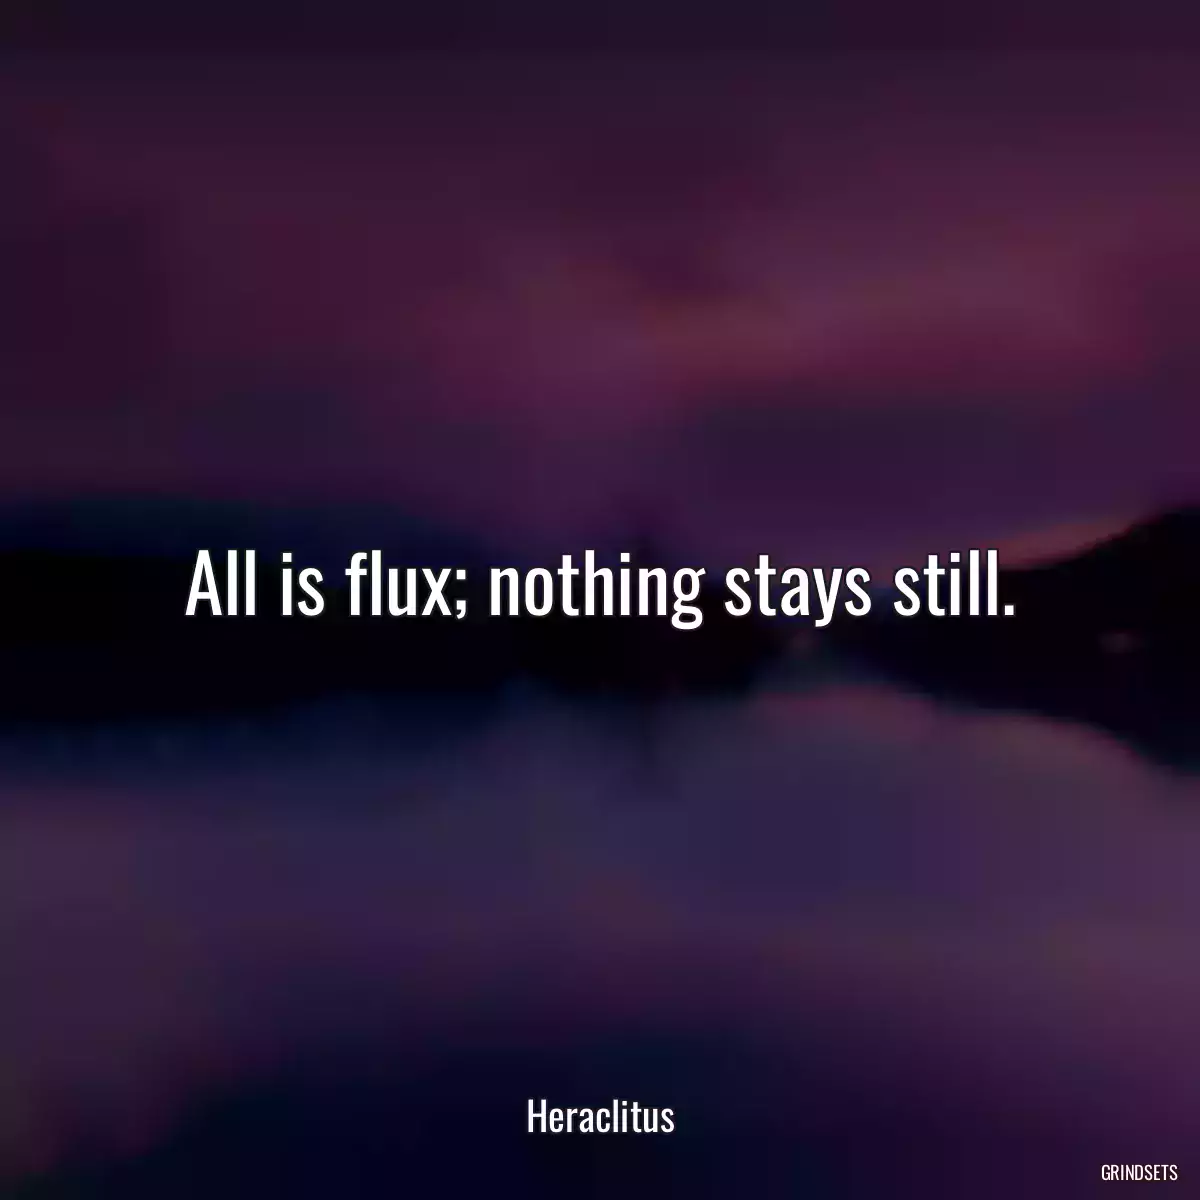 All is flux; nothing stays still.